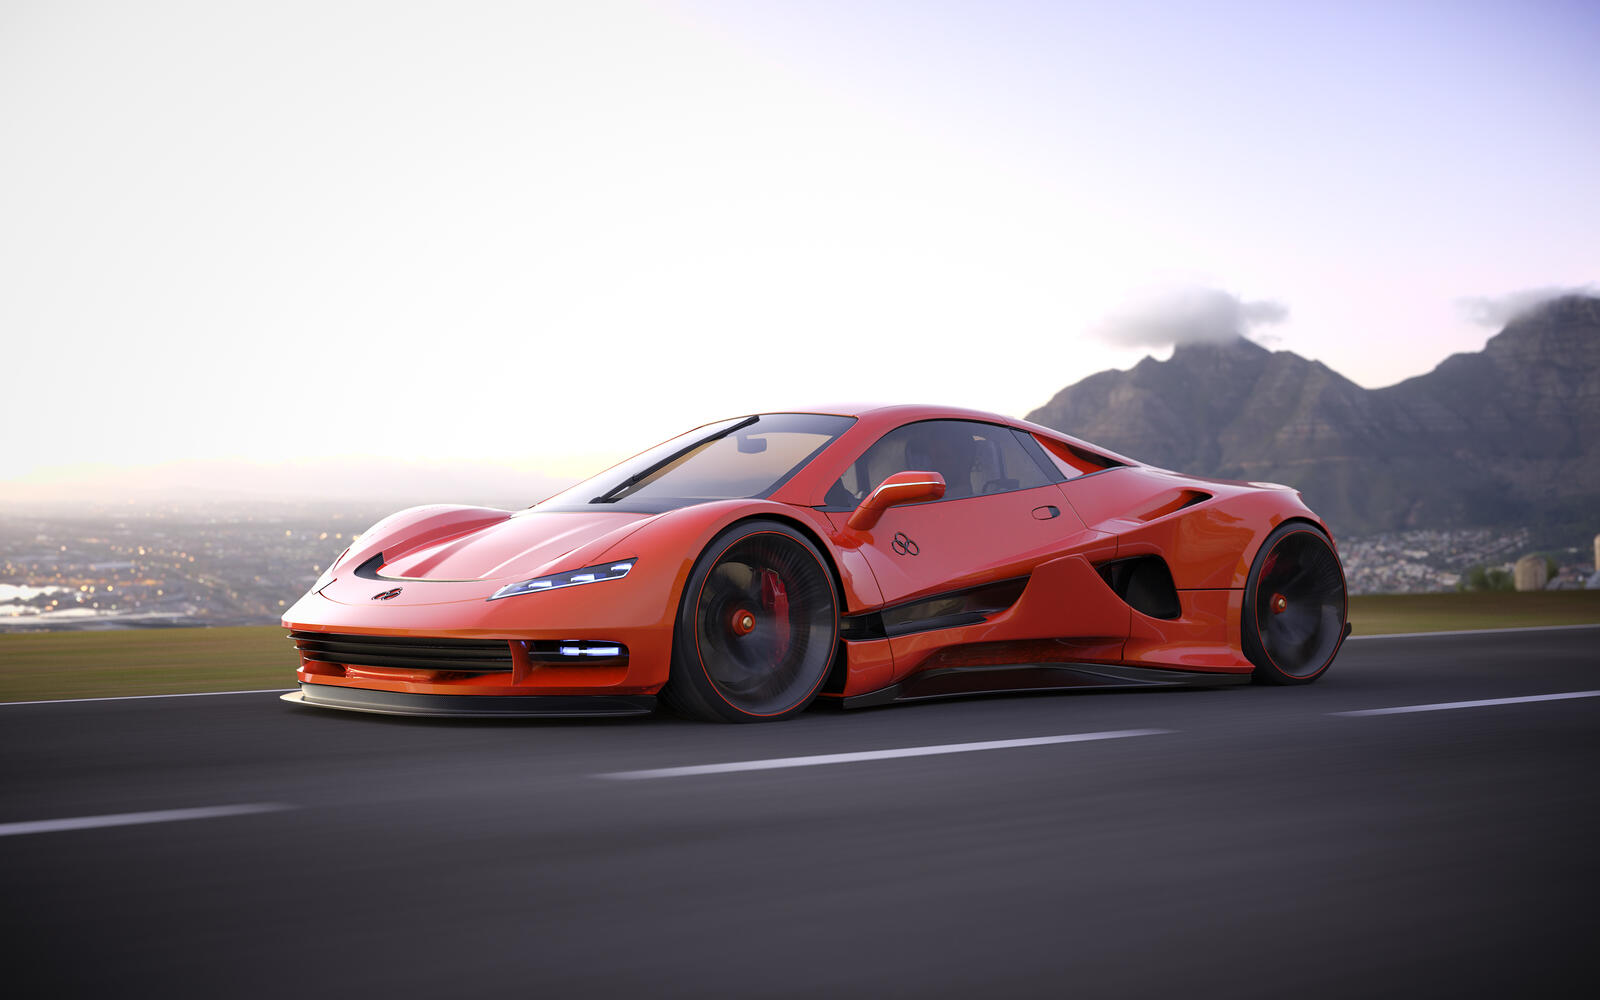 Free photo Orange supercar at high speed on the road